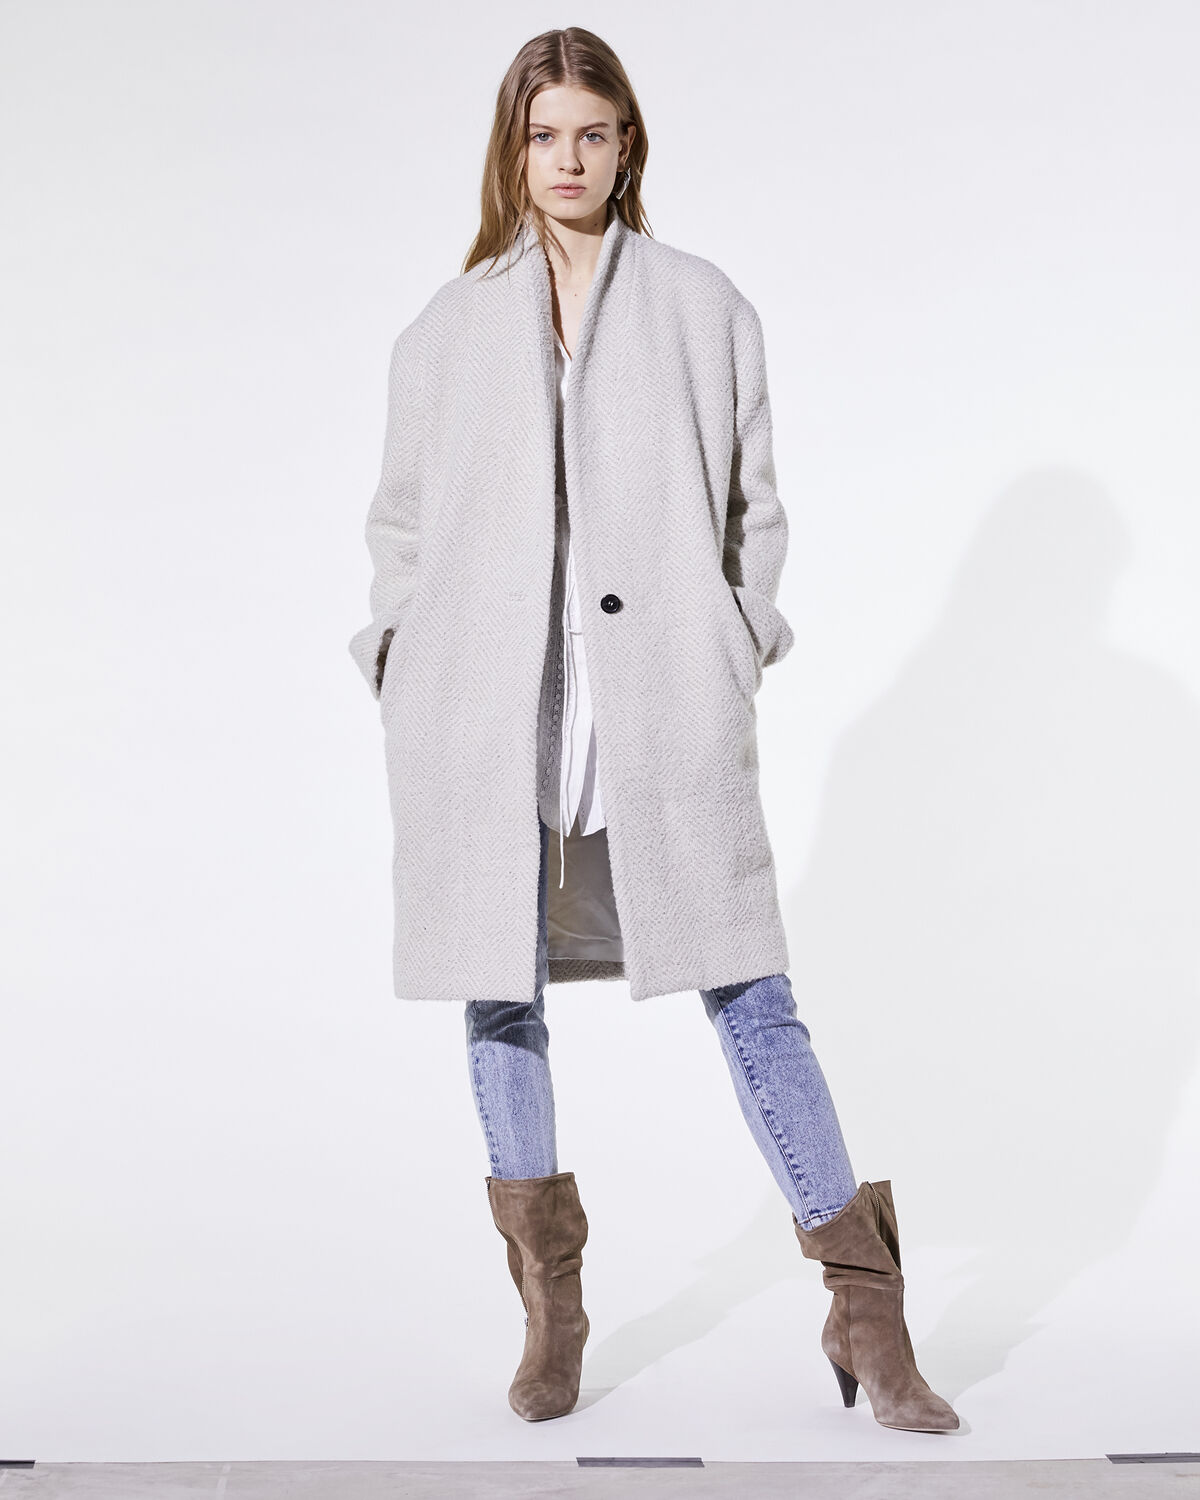 Photo of IRO Paris Irinia Coat Grey - This Coat Made From Virgin Wool Is Distinguished By Its Slim Fit And Slightly Drooping Shoulders. It Will Bring A Chic And Refined Touch To Your Outfits. Fall Winter 19